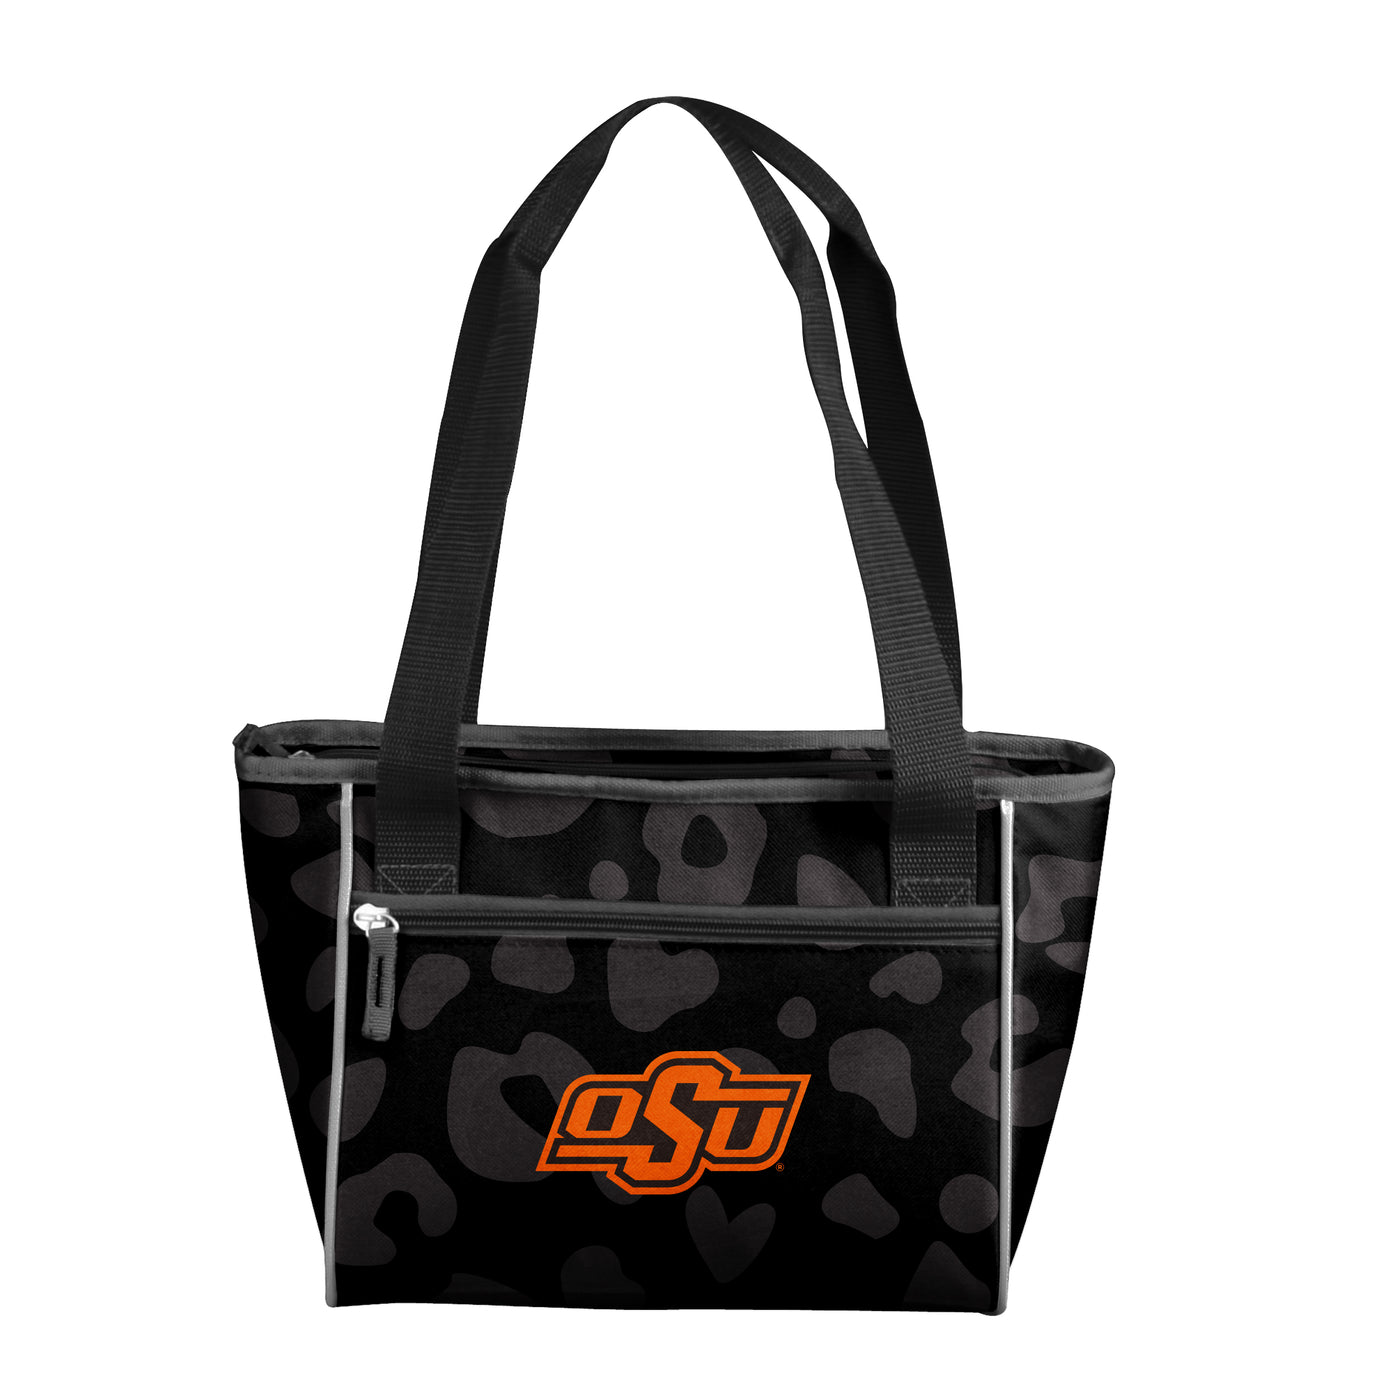 OK State Leopard Print 16 Can Cooler Tote